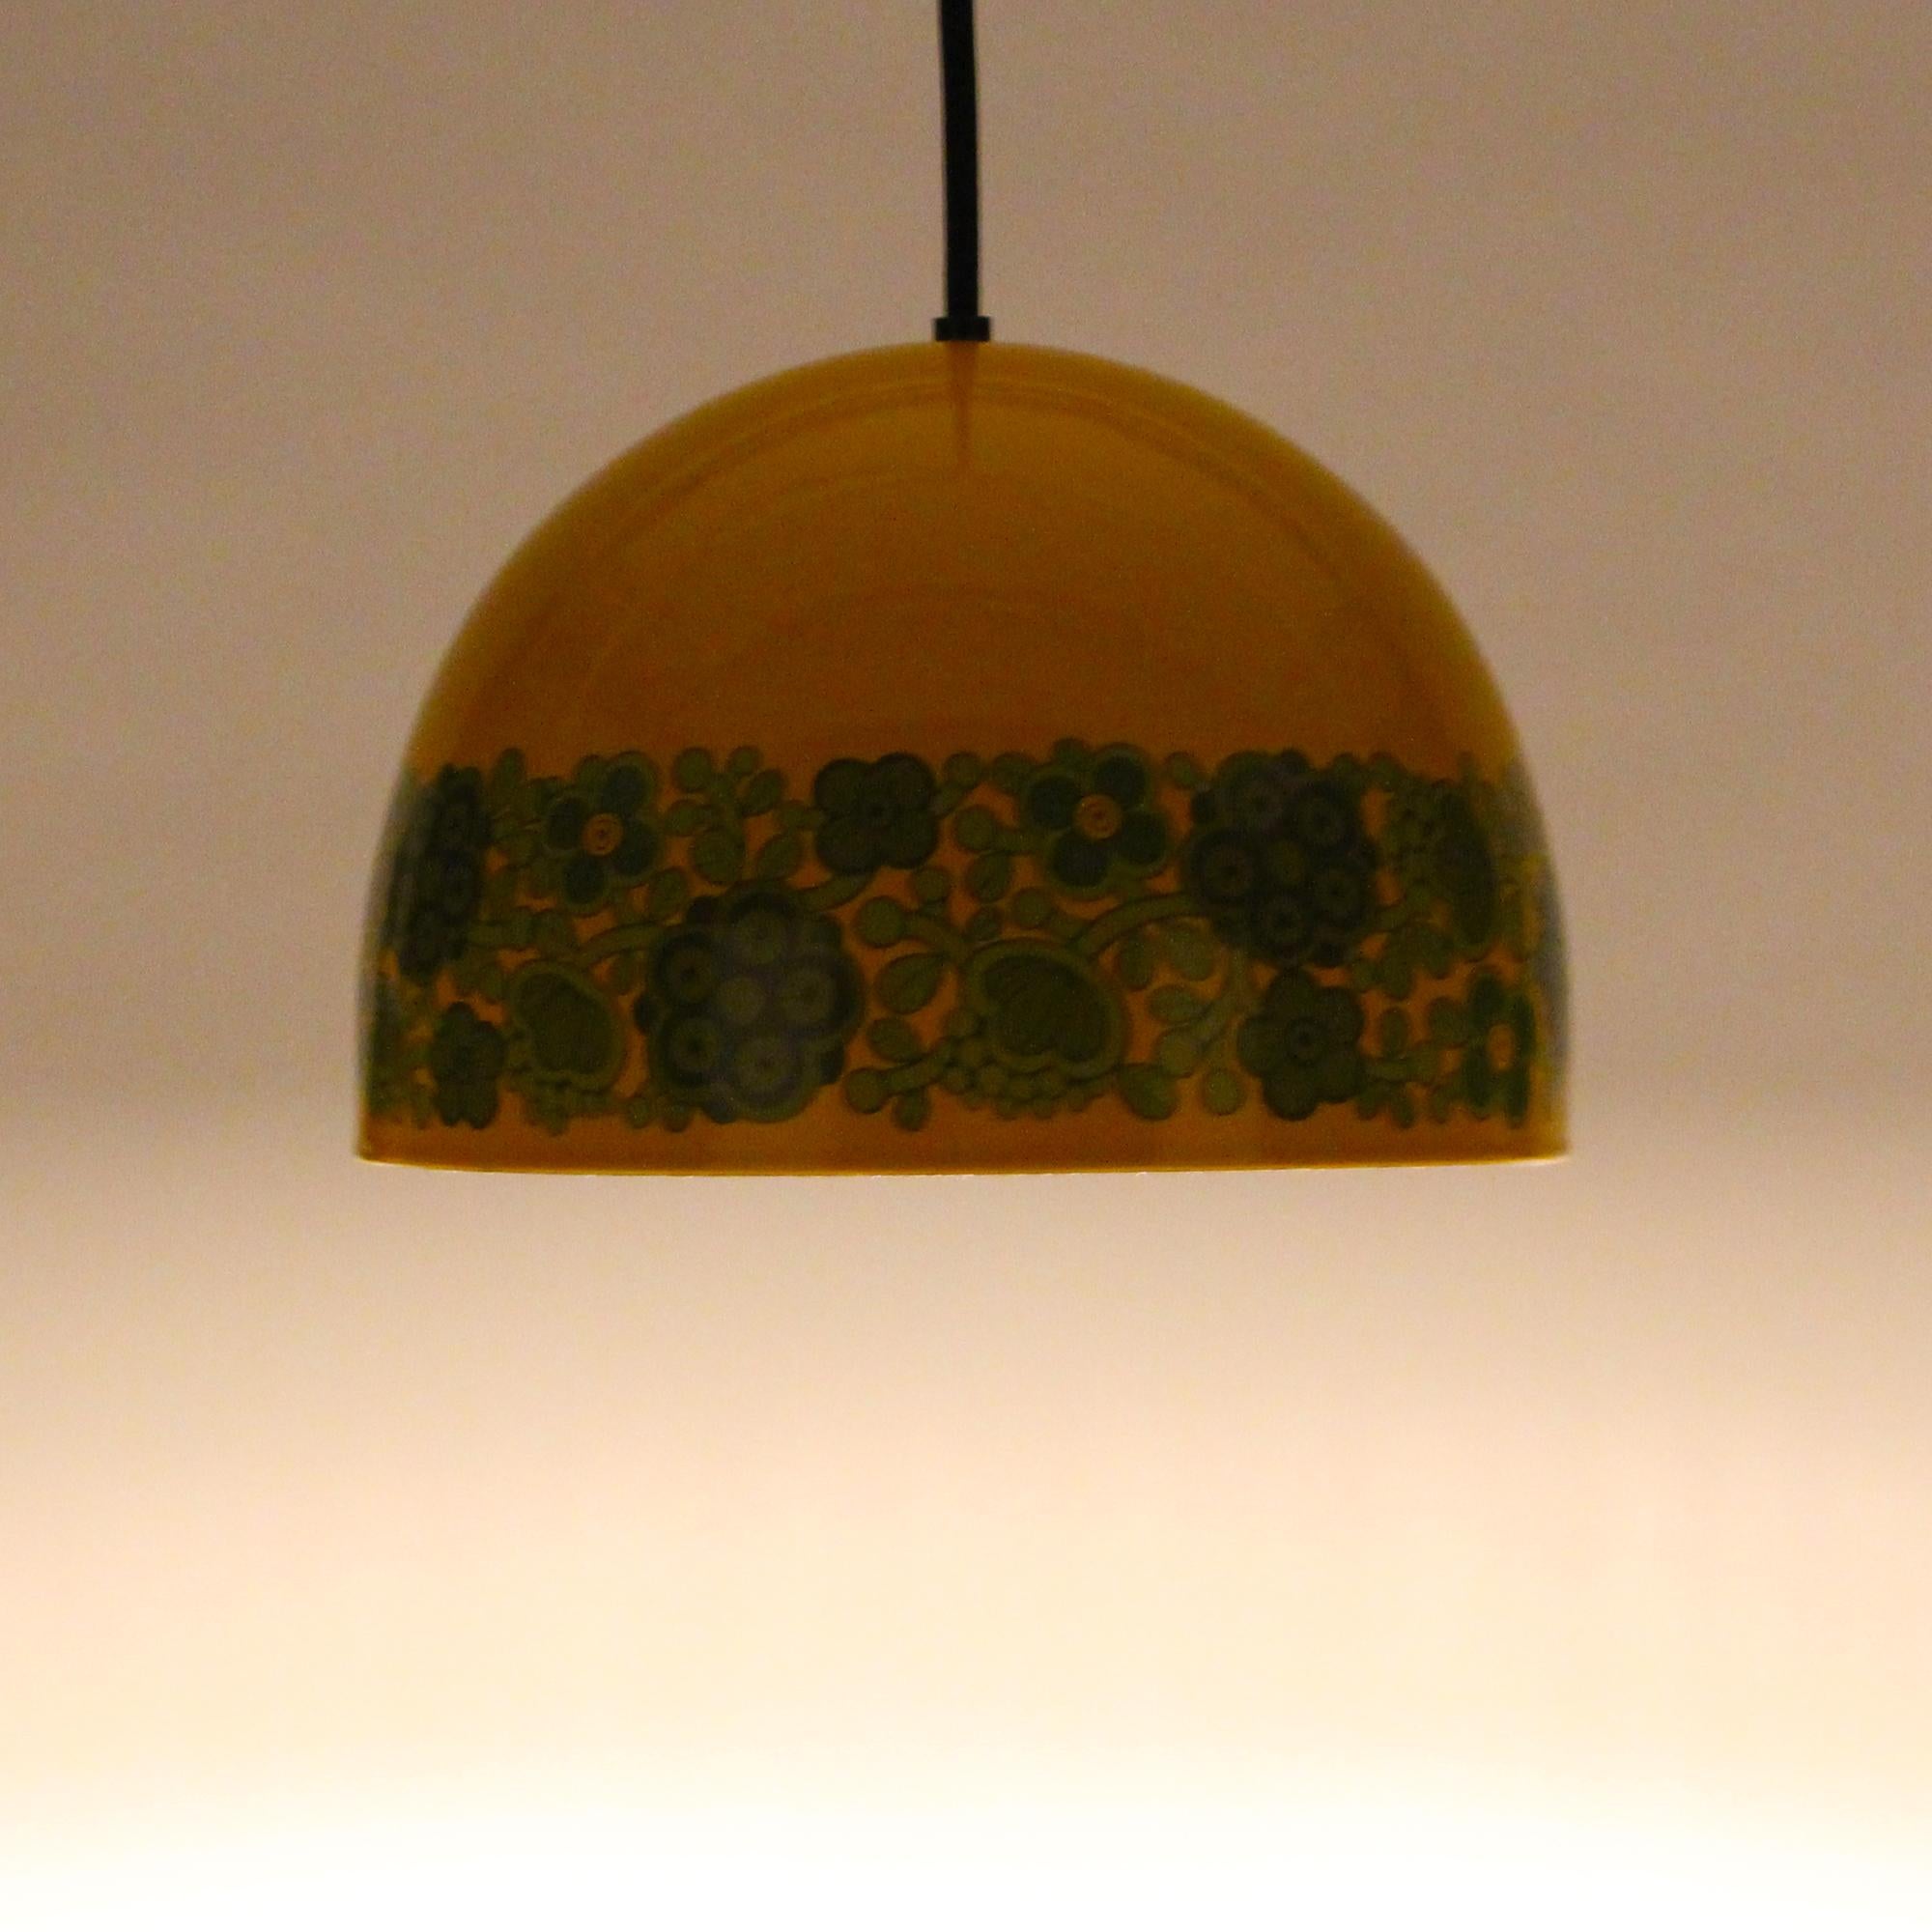 Maaret pendant or more commonly referred to as Arabia pendant is designed by Kaj Franck in the late 1960s-early 1970s, Scandinavian collaboration between Danish Fog & Mørup and Finish Arabia. Gorgeous yellow enameled hanging lamp in excellent